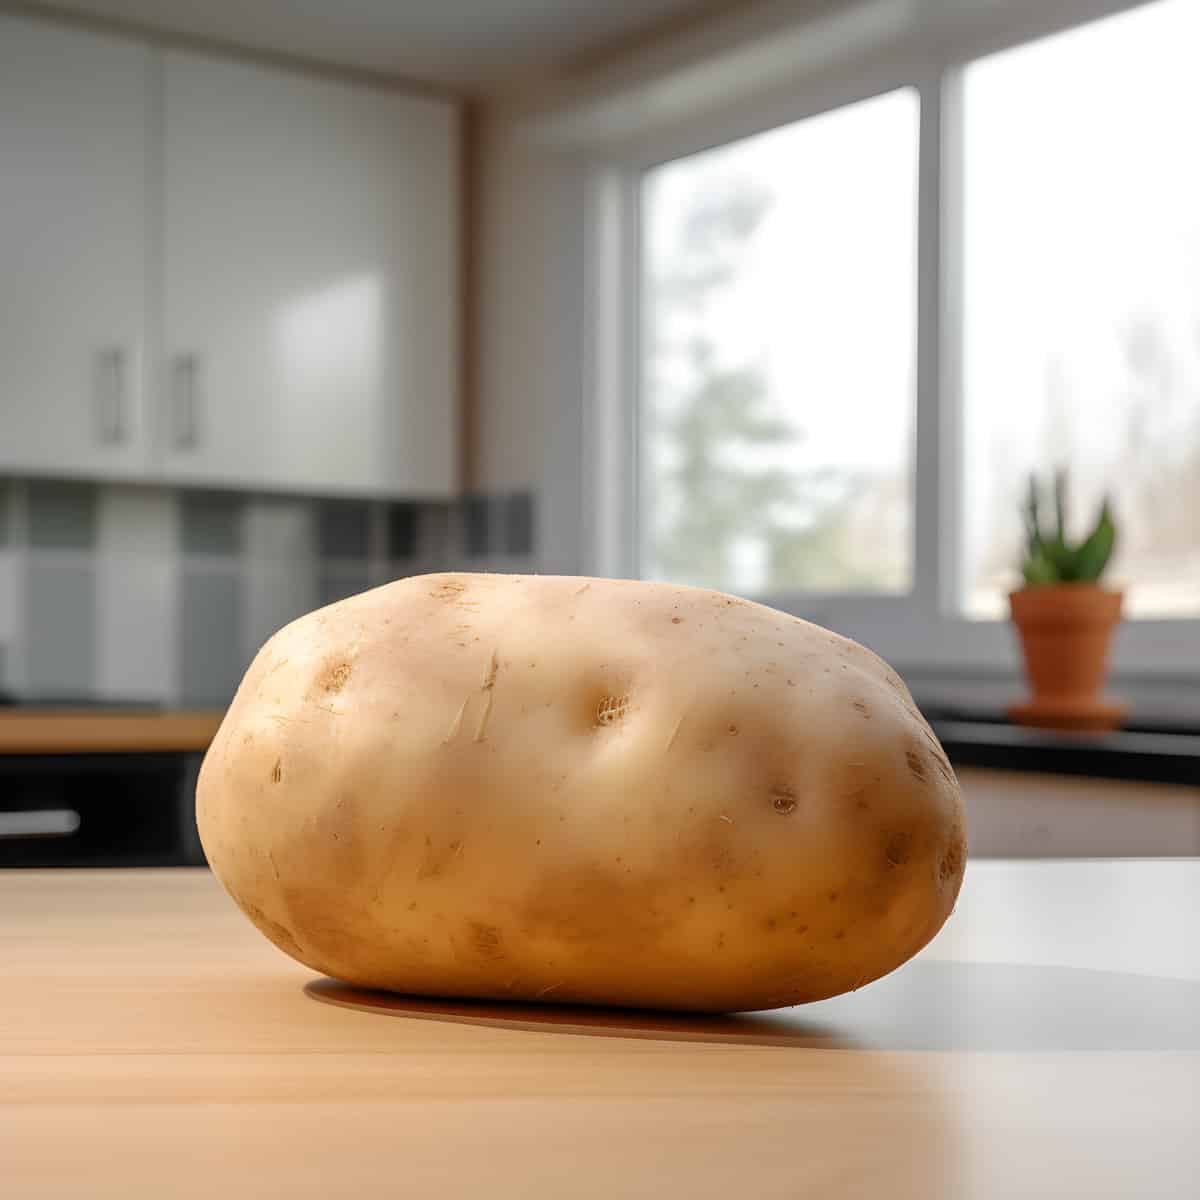 Bf Potatoes on a kitchen counter